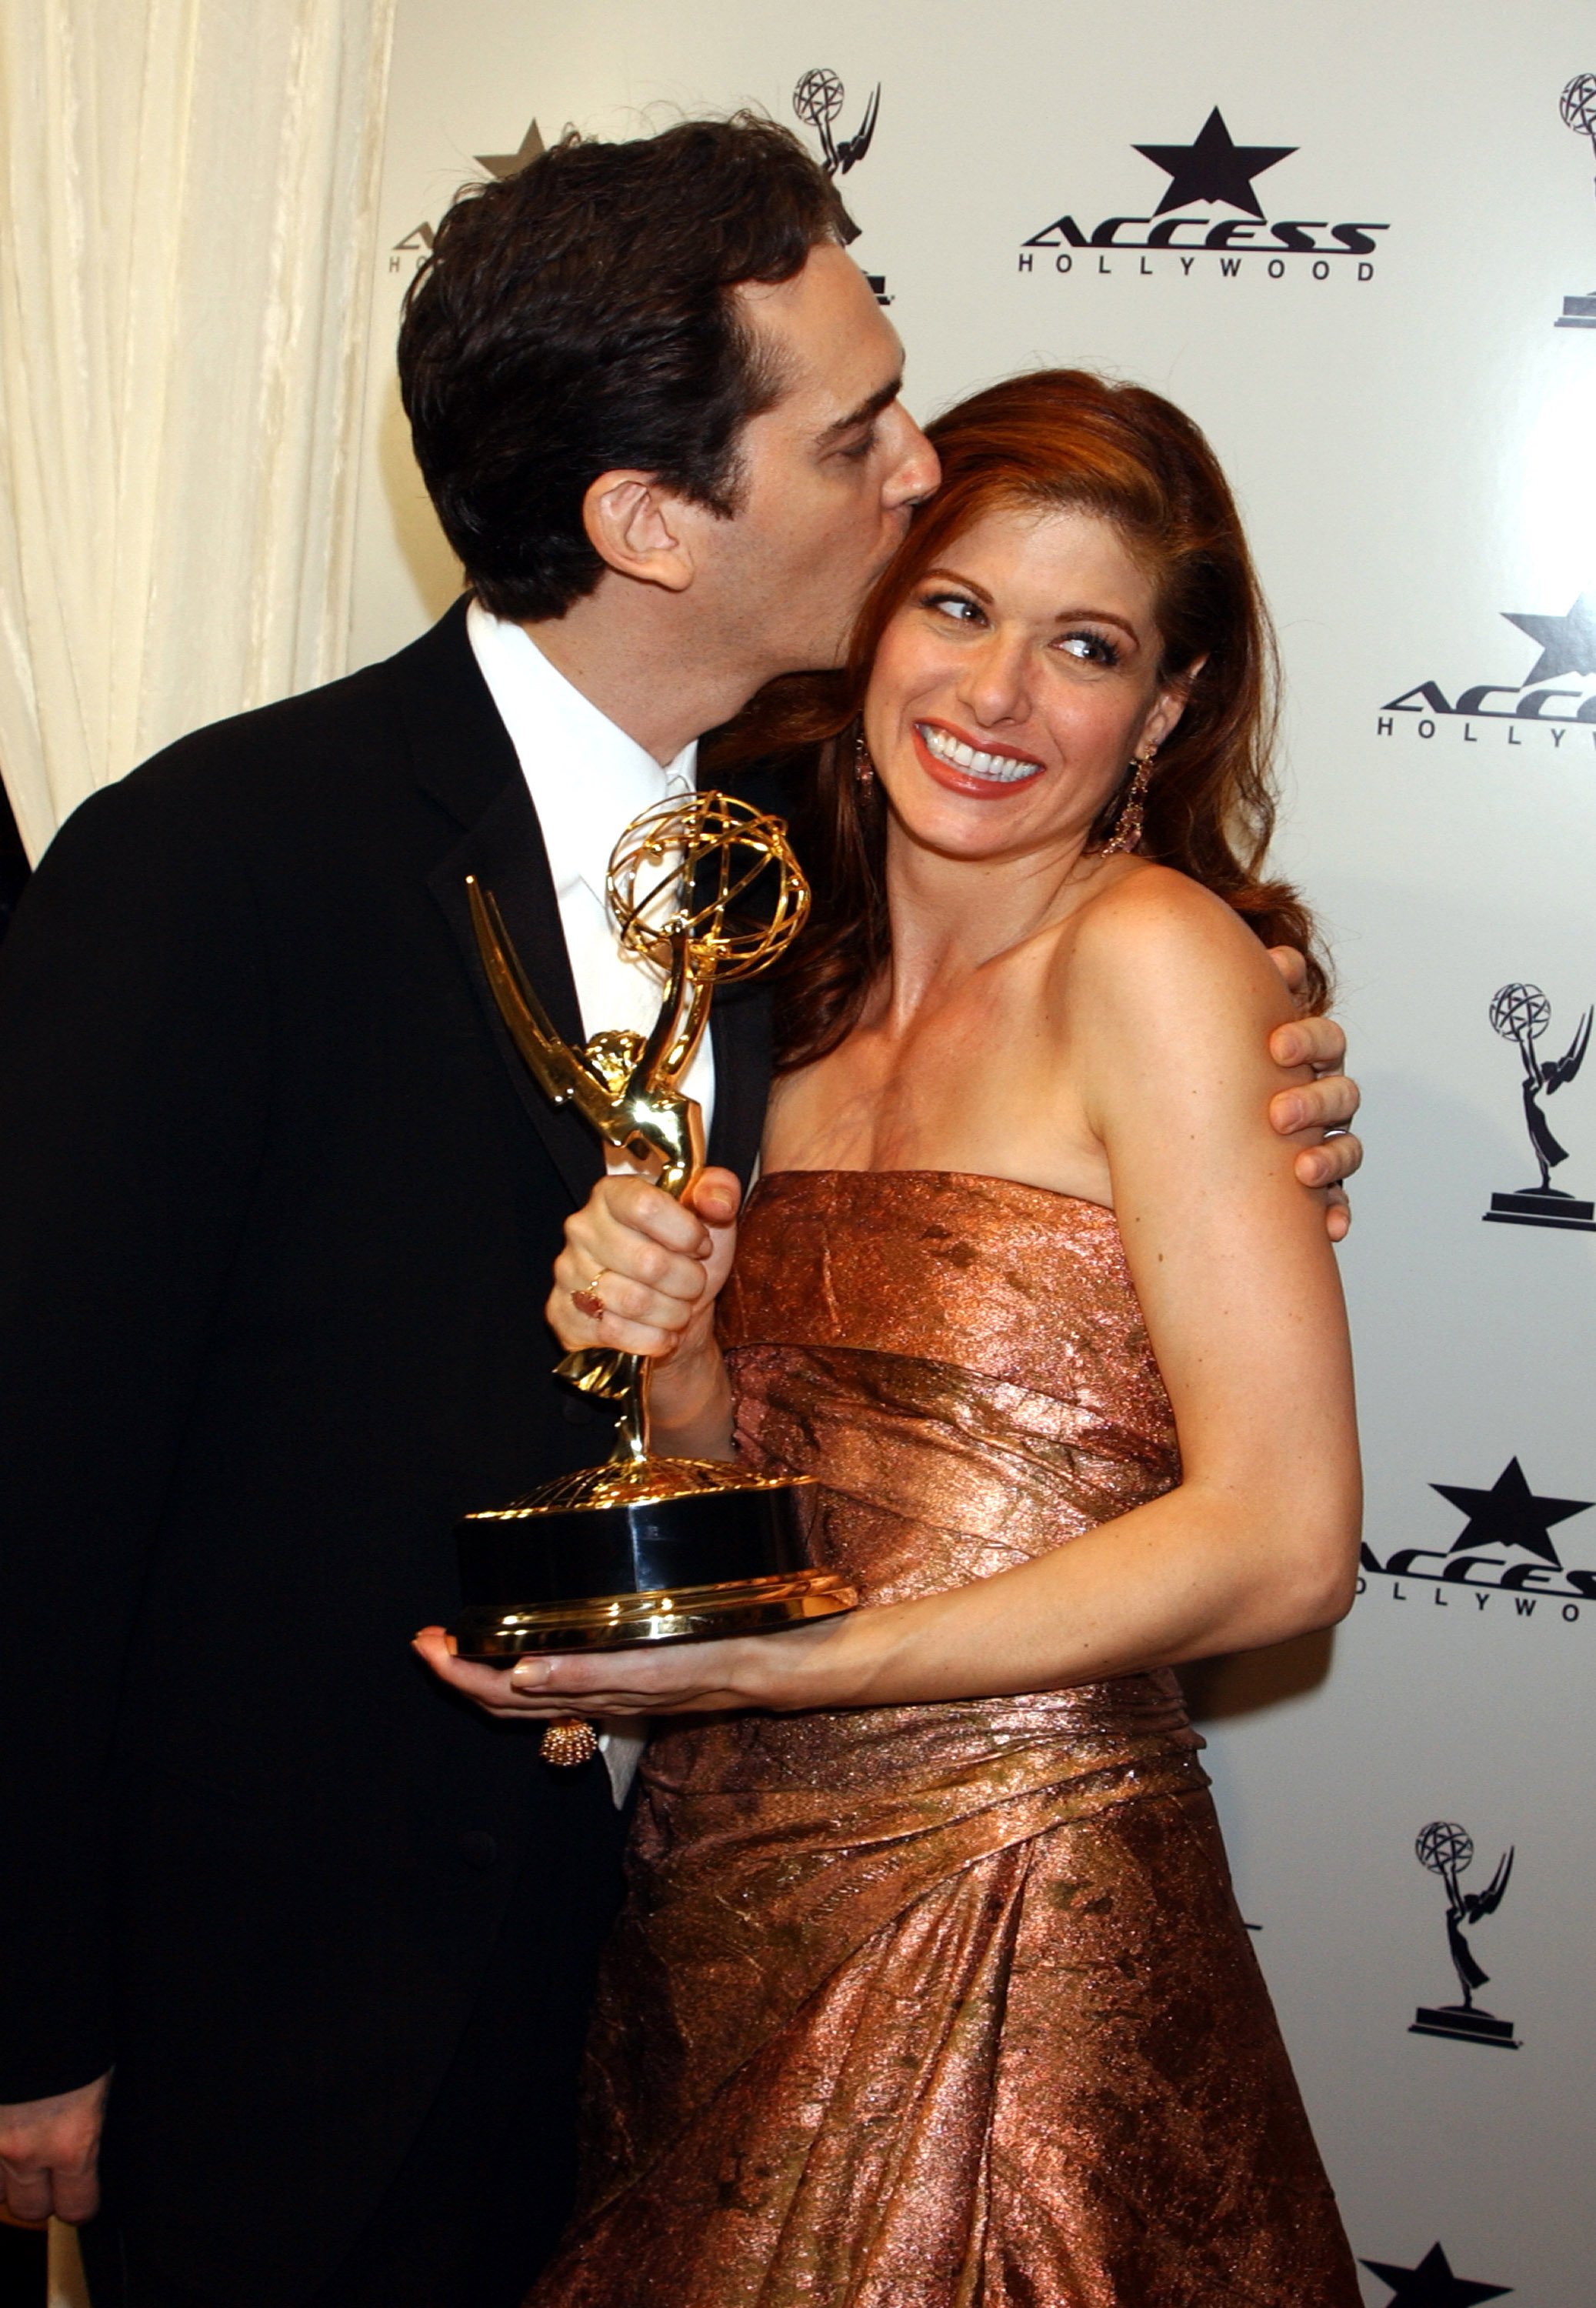 Debra Messing and Daniel Zelman after she won an Emmy for Outstanding Lead Actress in a Comedy Series for "Will & Grace" at the 55th Annual Primetime Emmy Awards. | Source: Getty Images